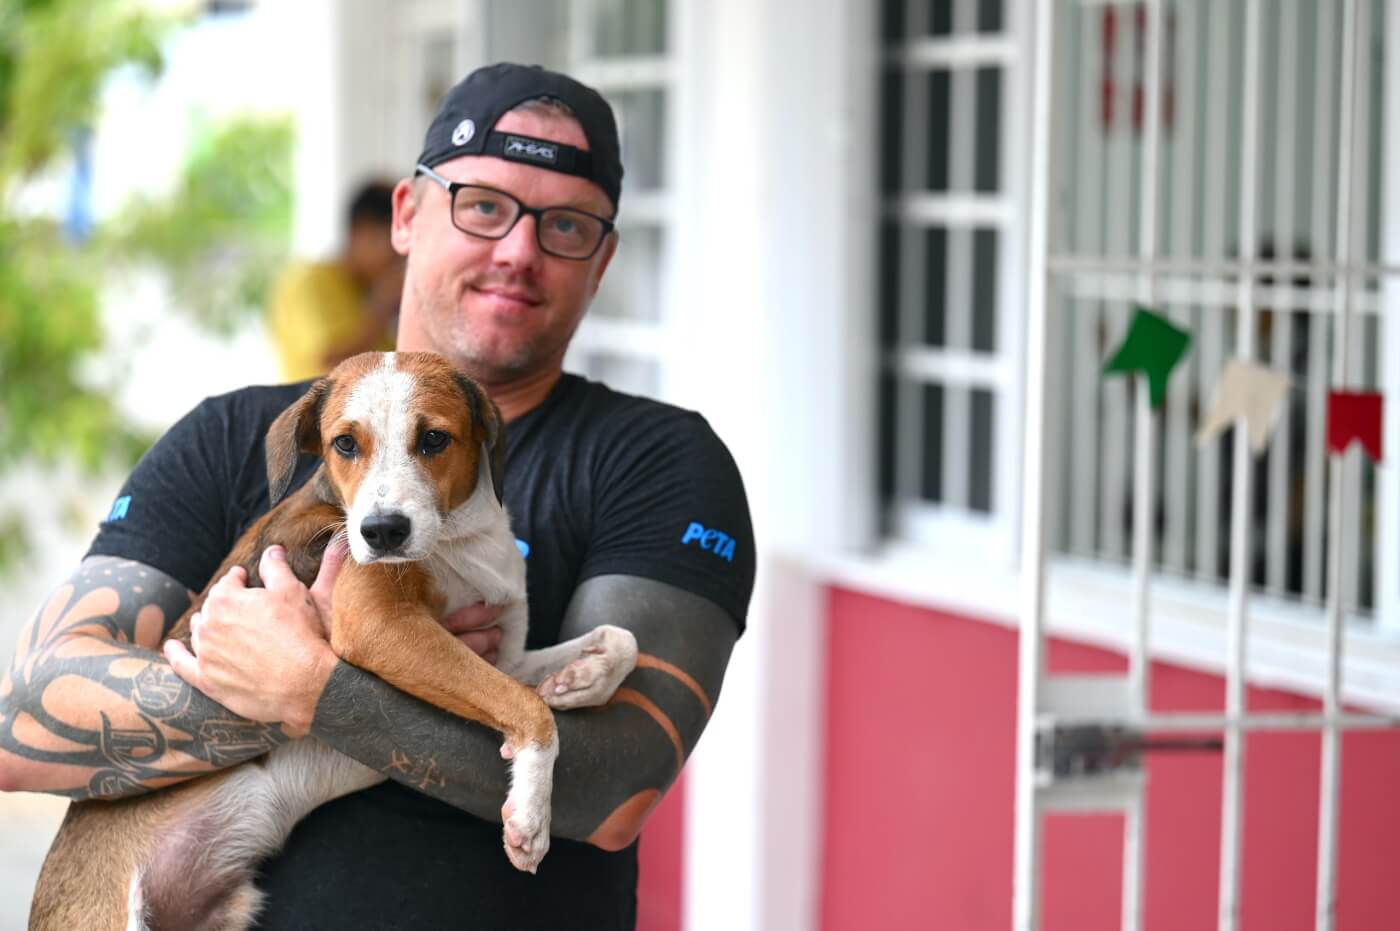 PETA staff holds a dog in Cancun for the spay/neuter event